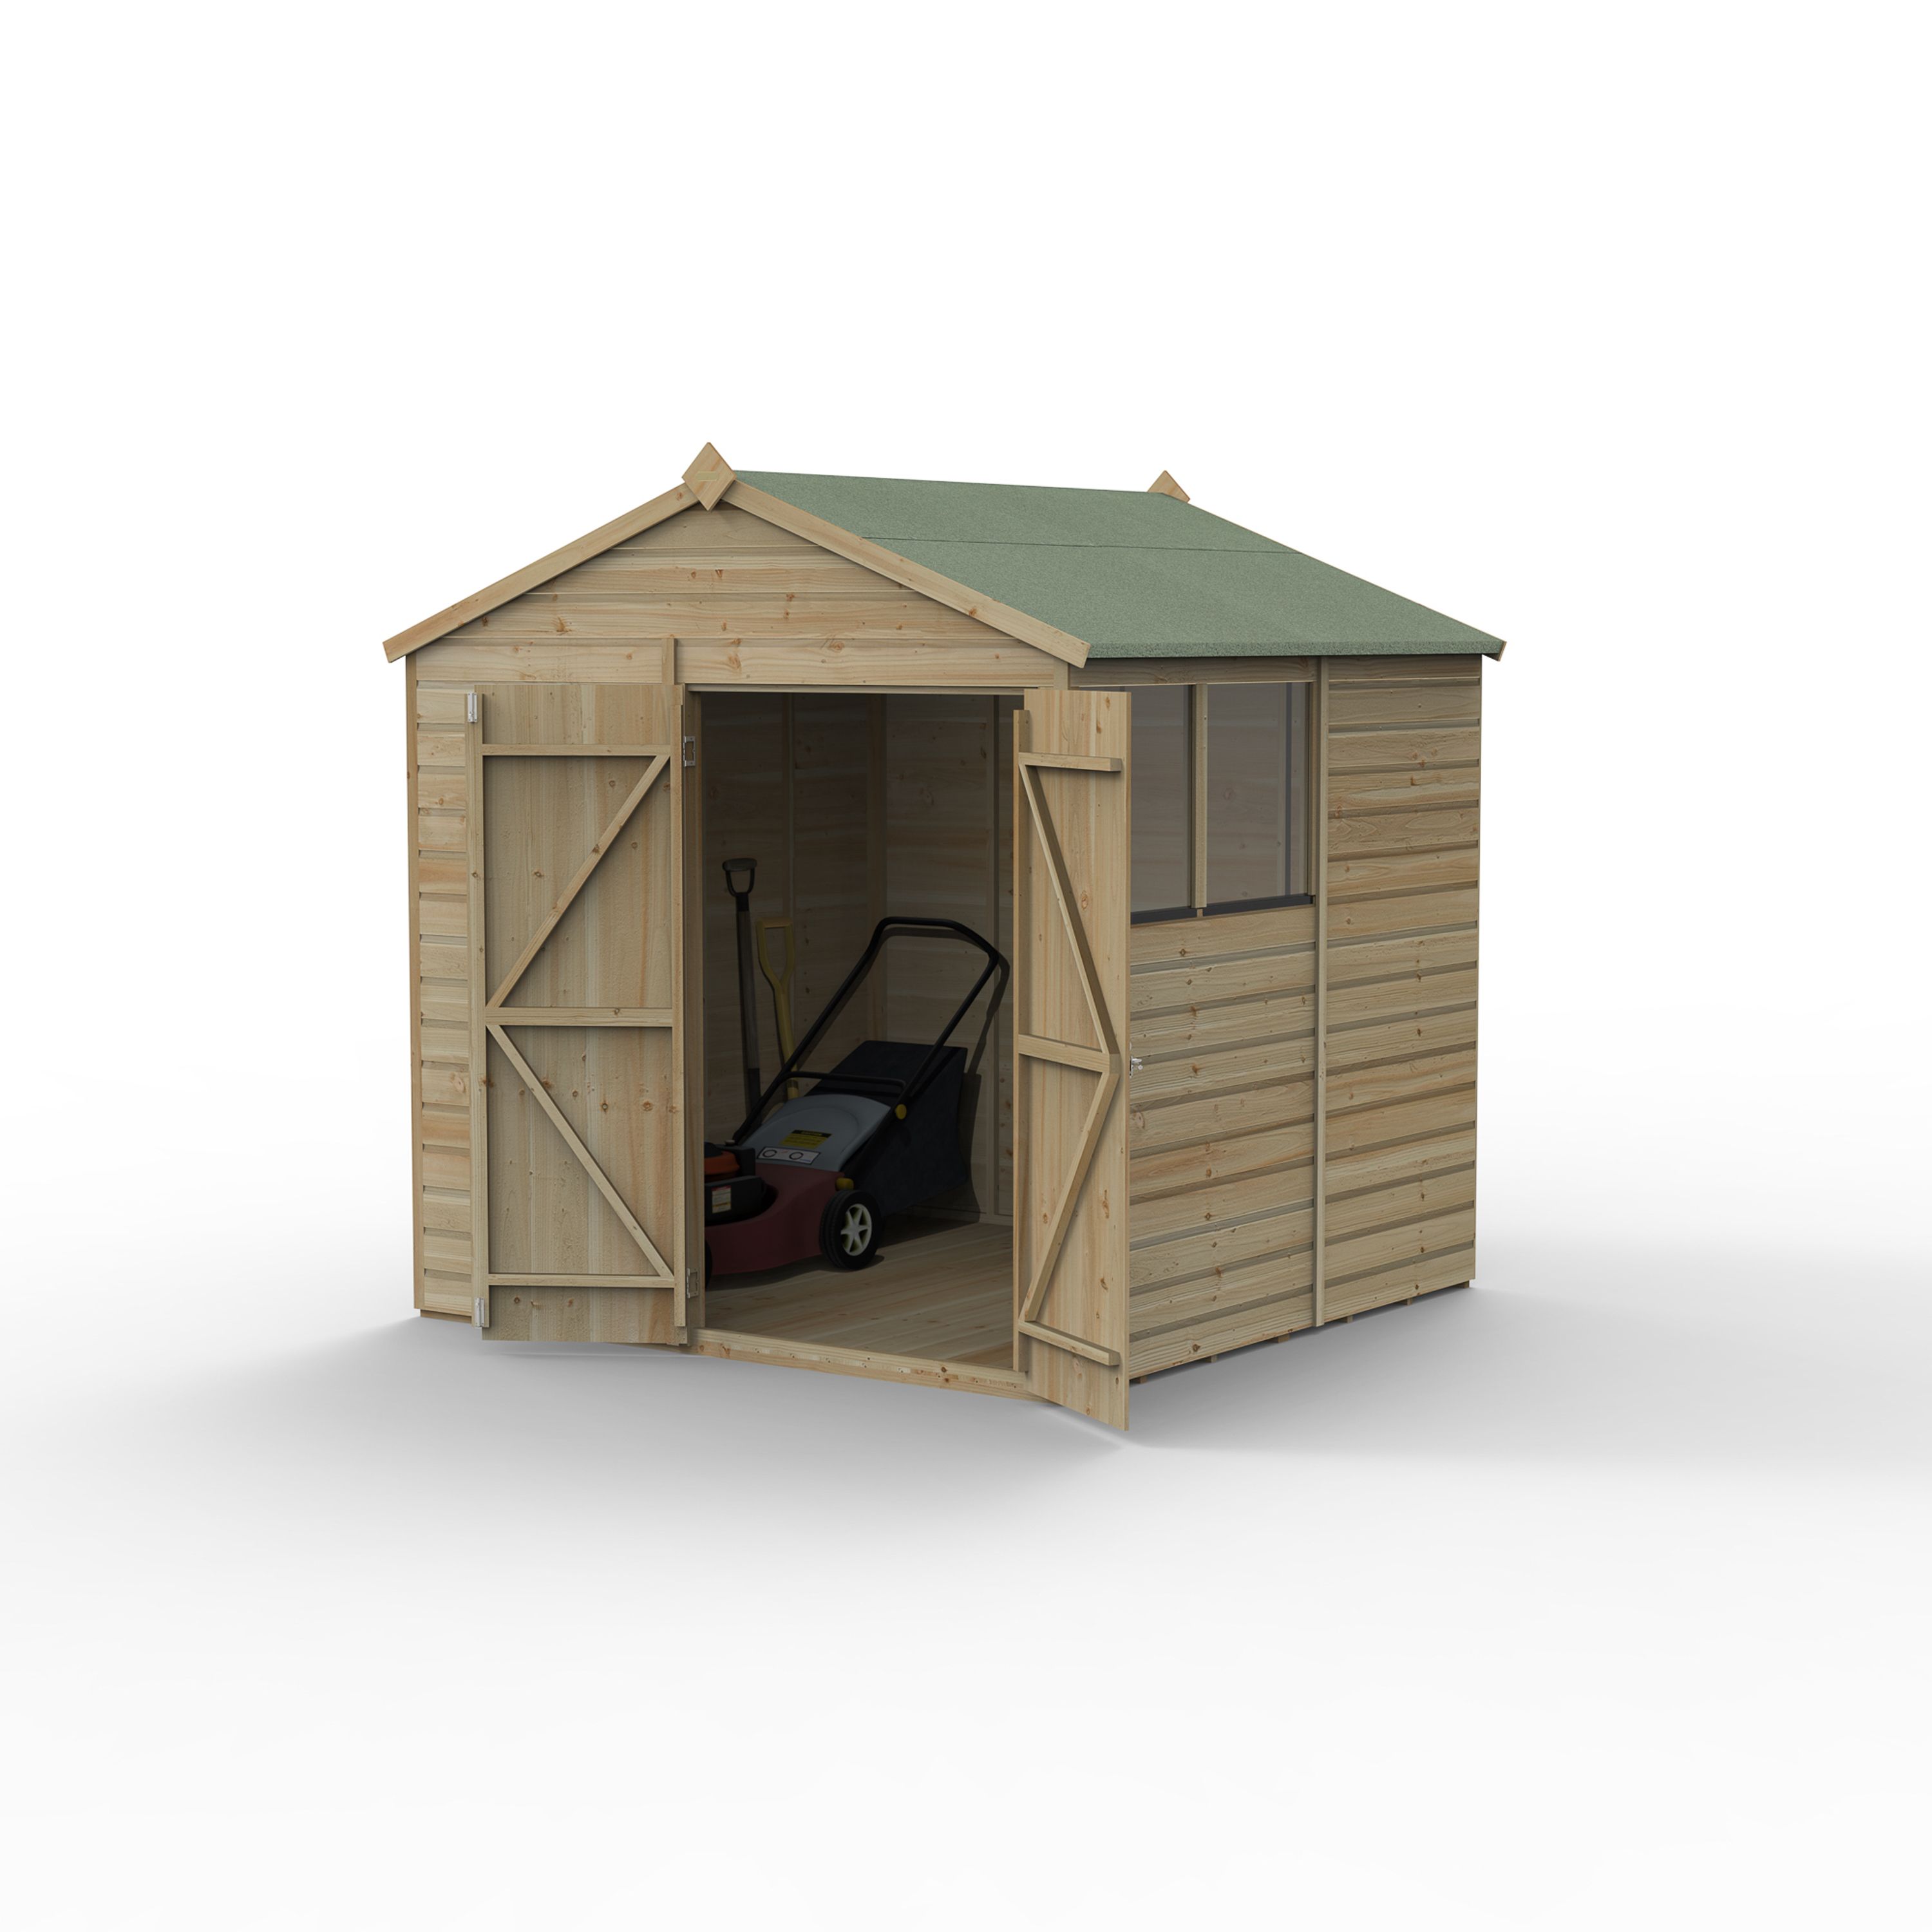 Forest Garden Beckwood 7x7 ft Apex Natural timber Wooden 2 door Shed with floor & 2 windows (Base included)